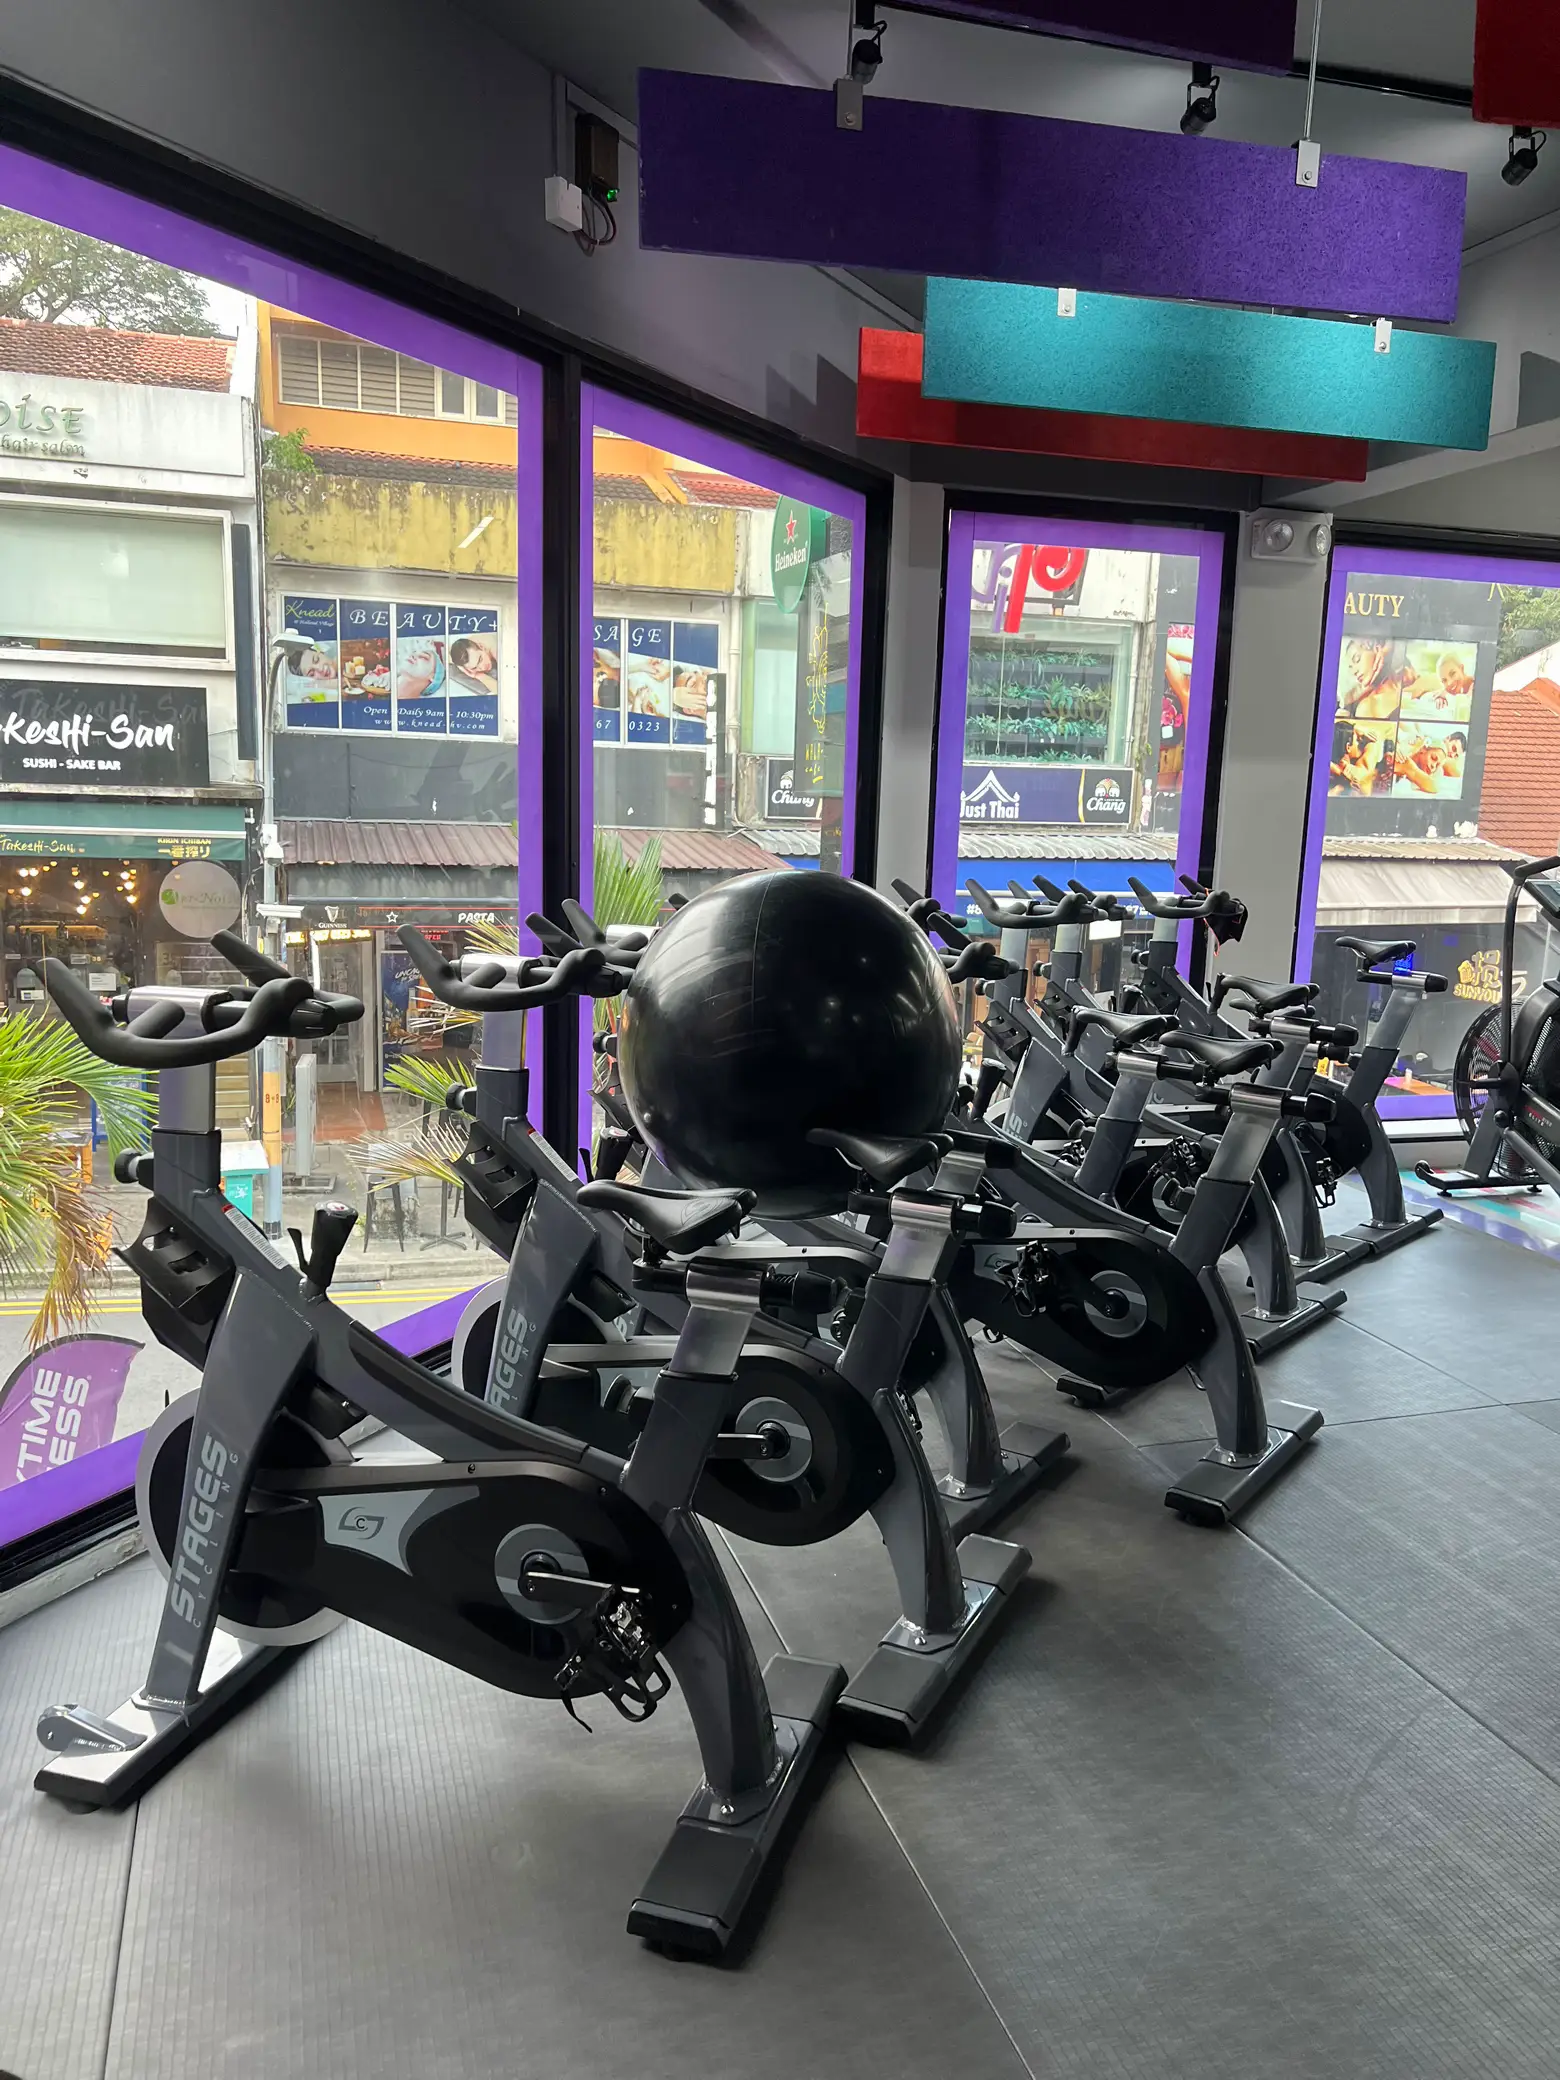 anytime fitness holland - Lemon8 Search